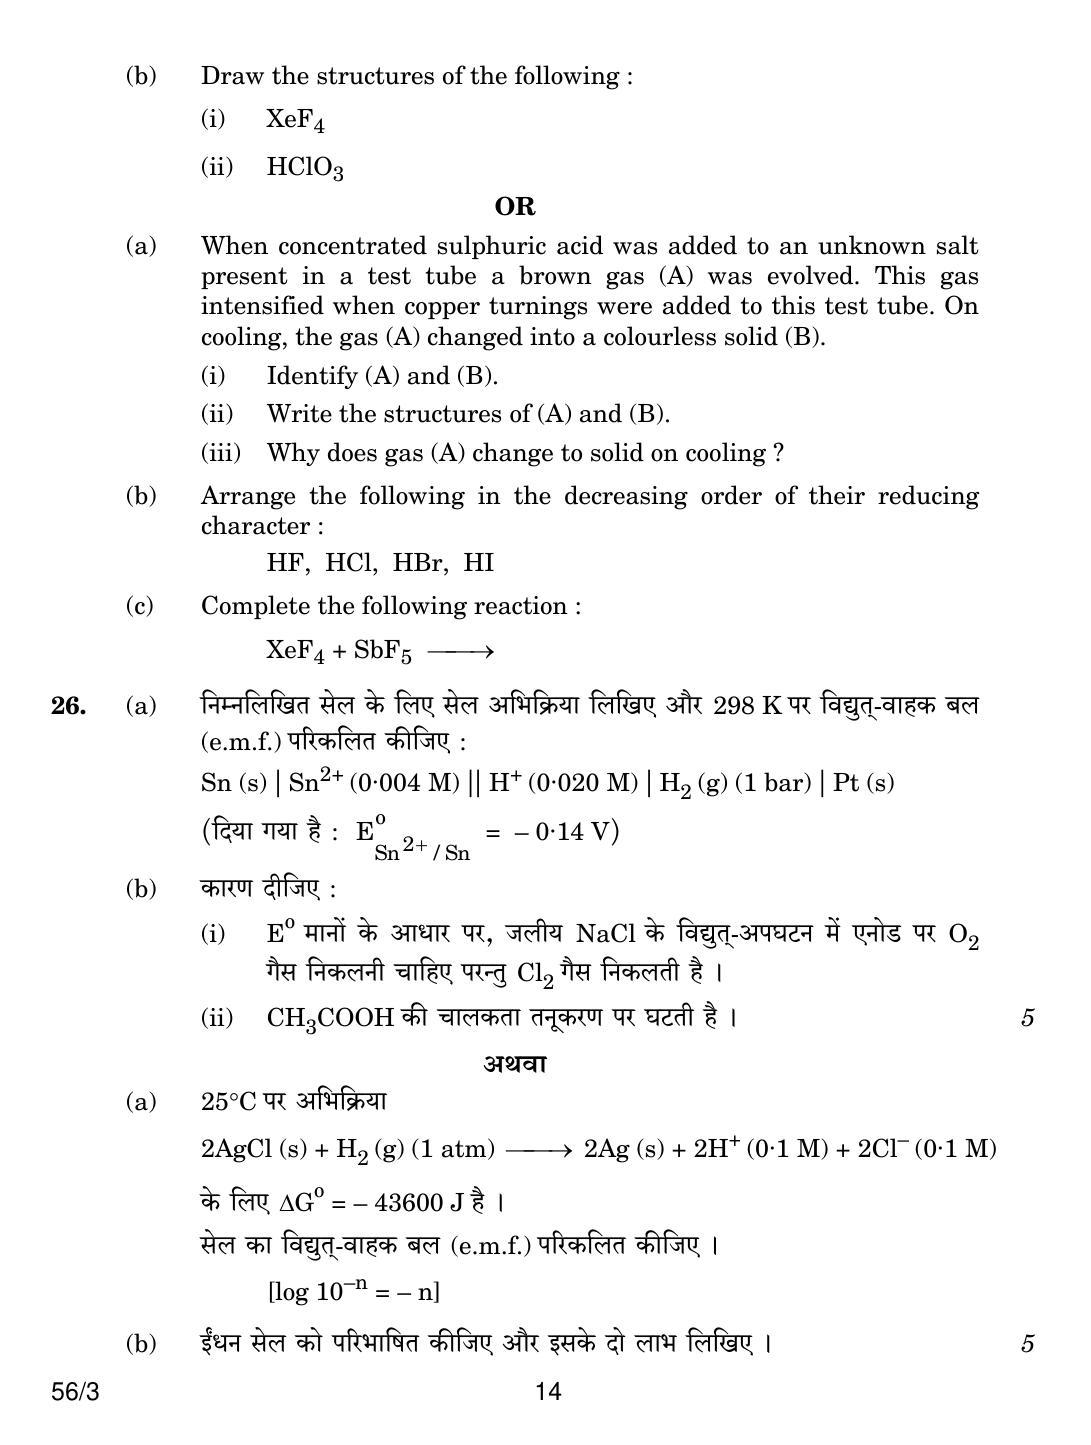 CBSE Class 12 56-3 CHEMISTRY 2018 Question Paper - Page 14